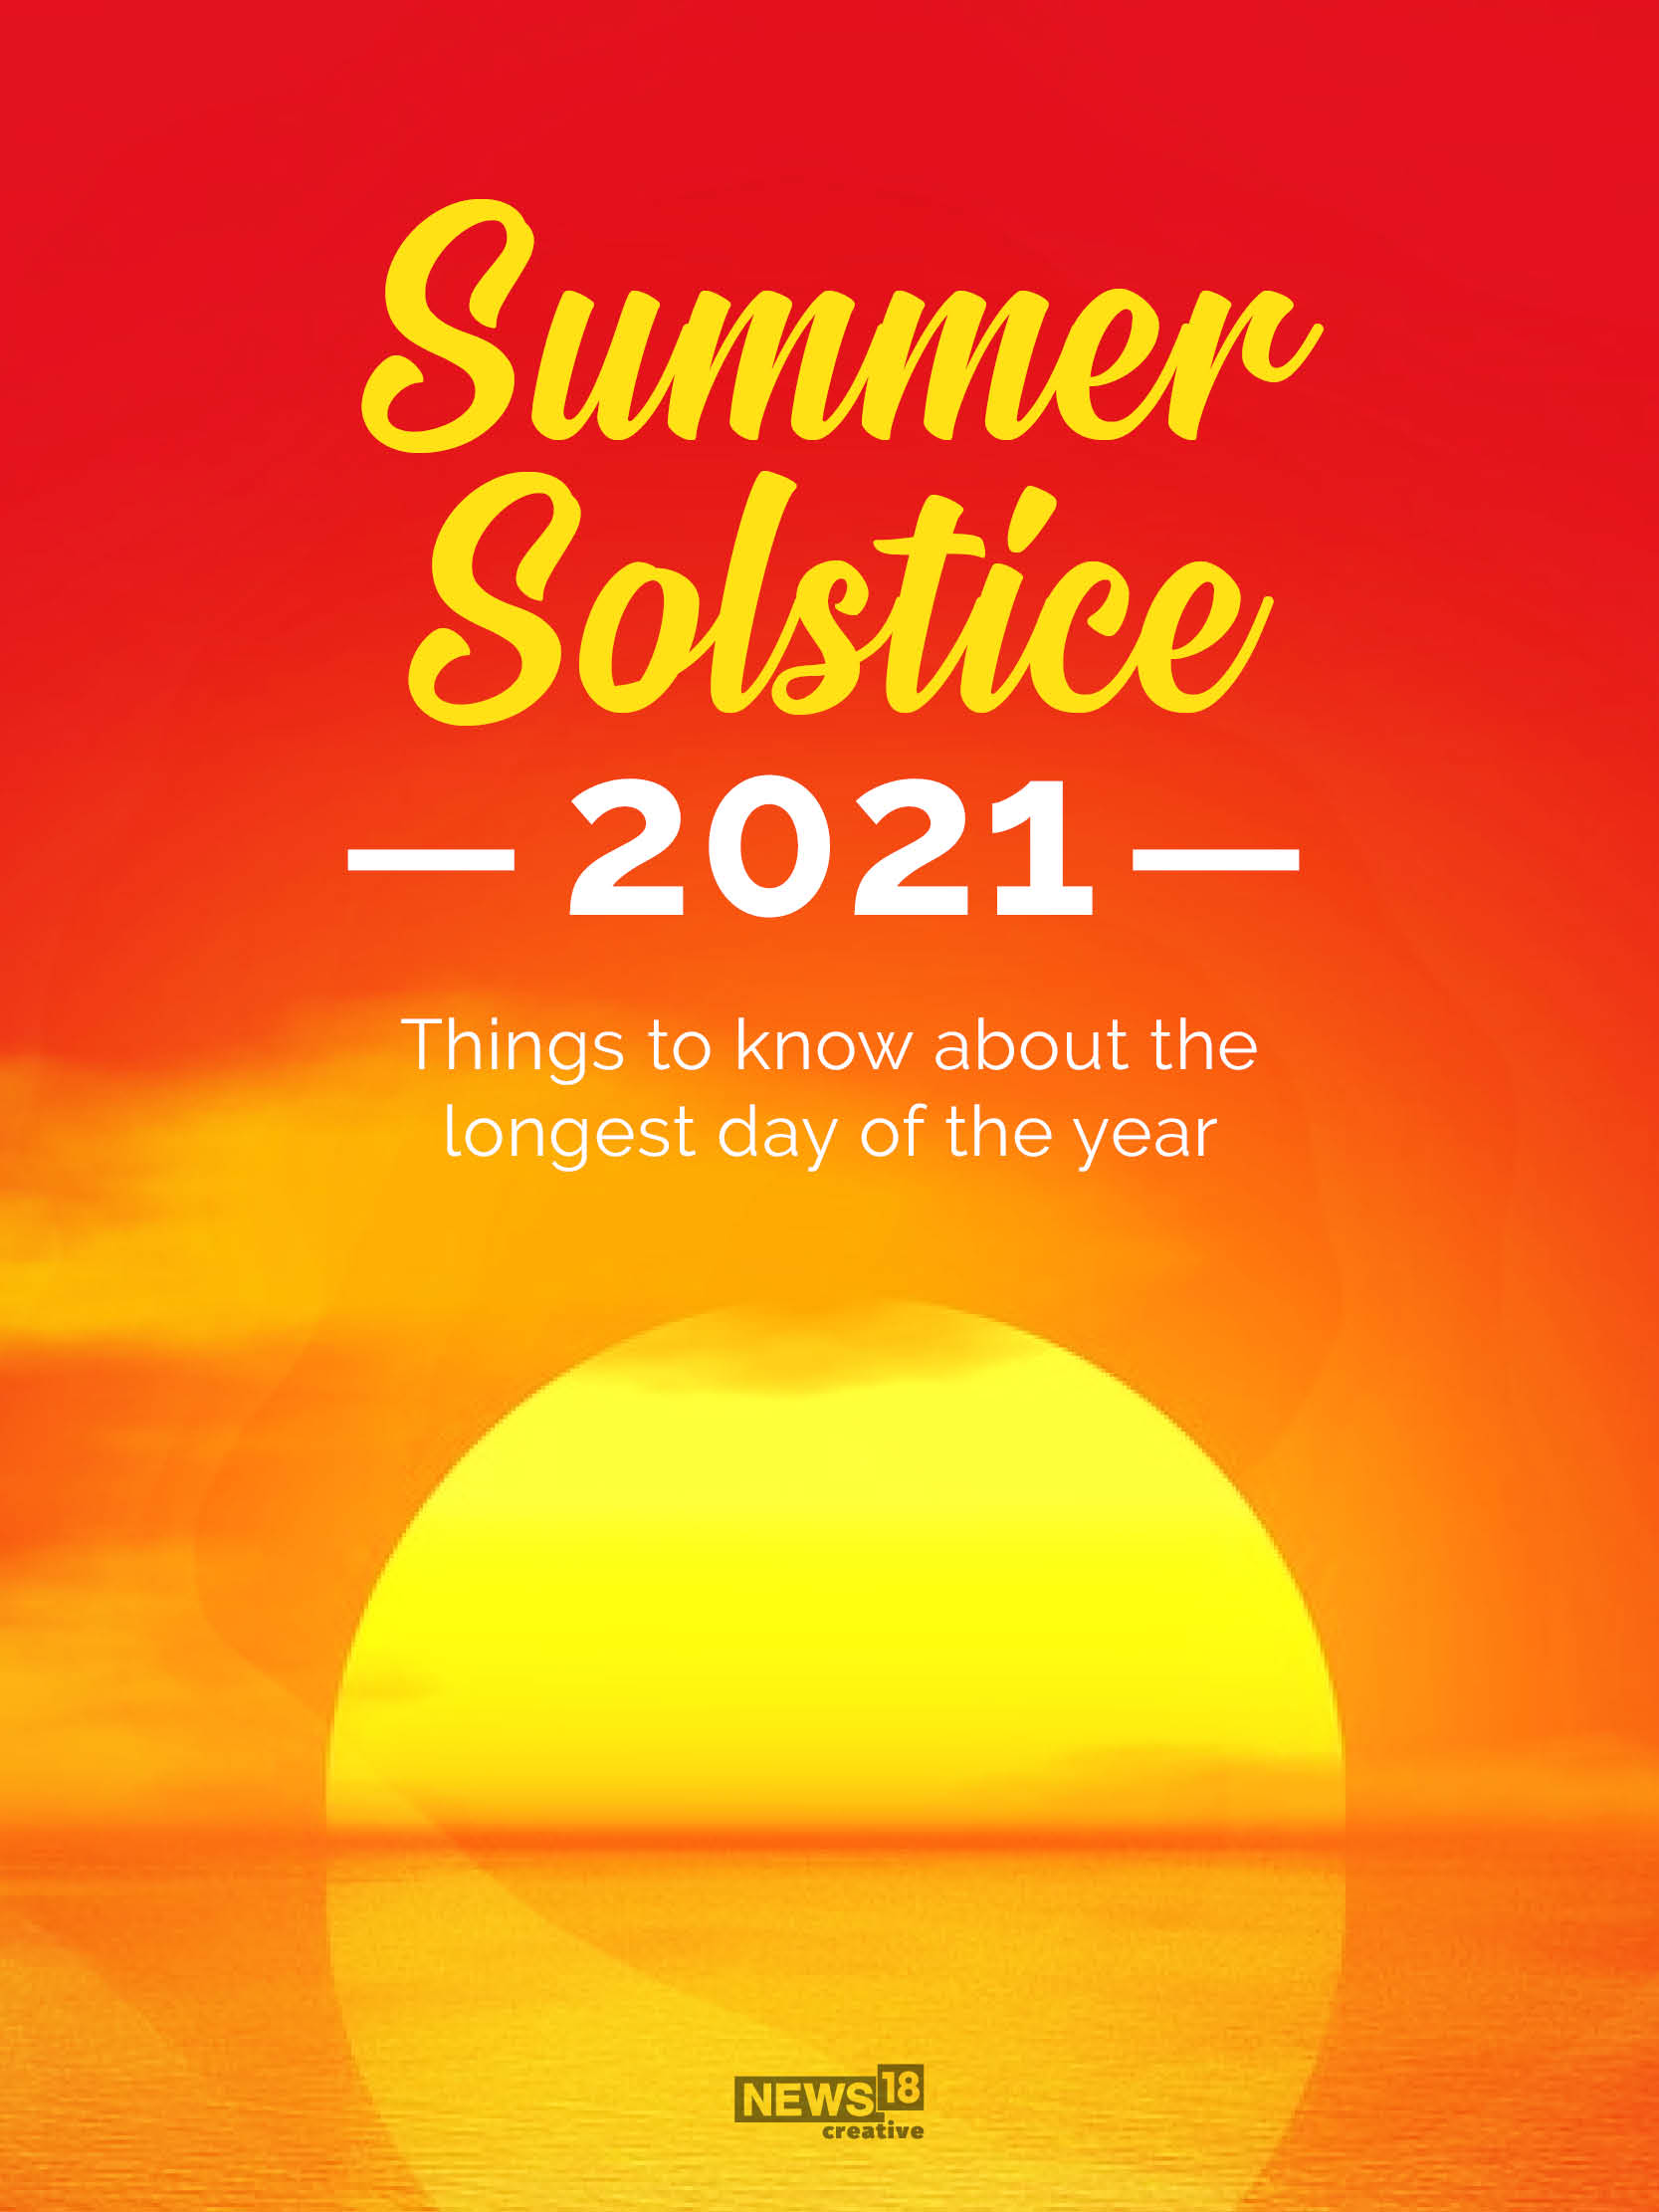 Summer Solstice 2021 Things to Know About The Longest Day of The Year